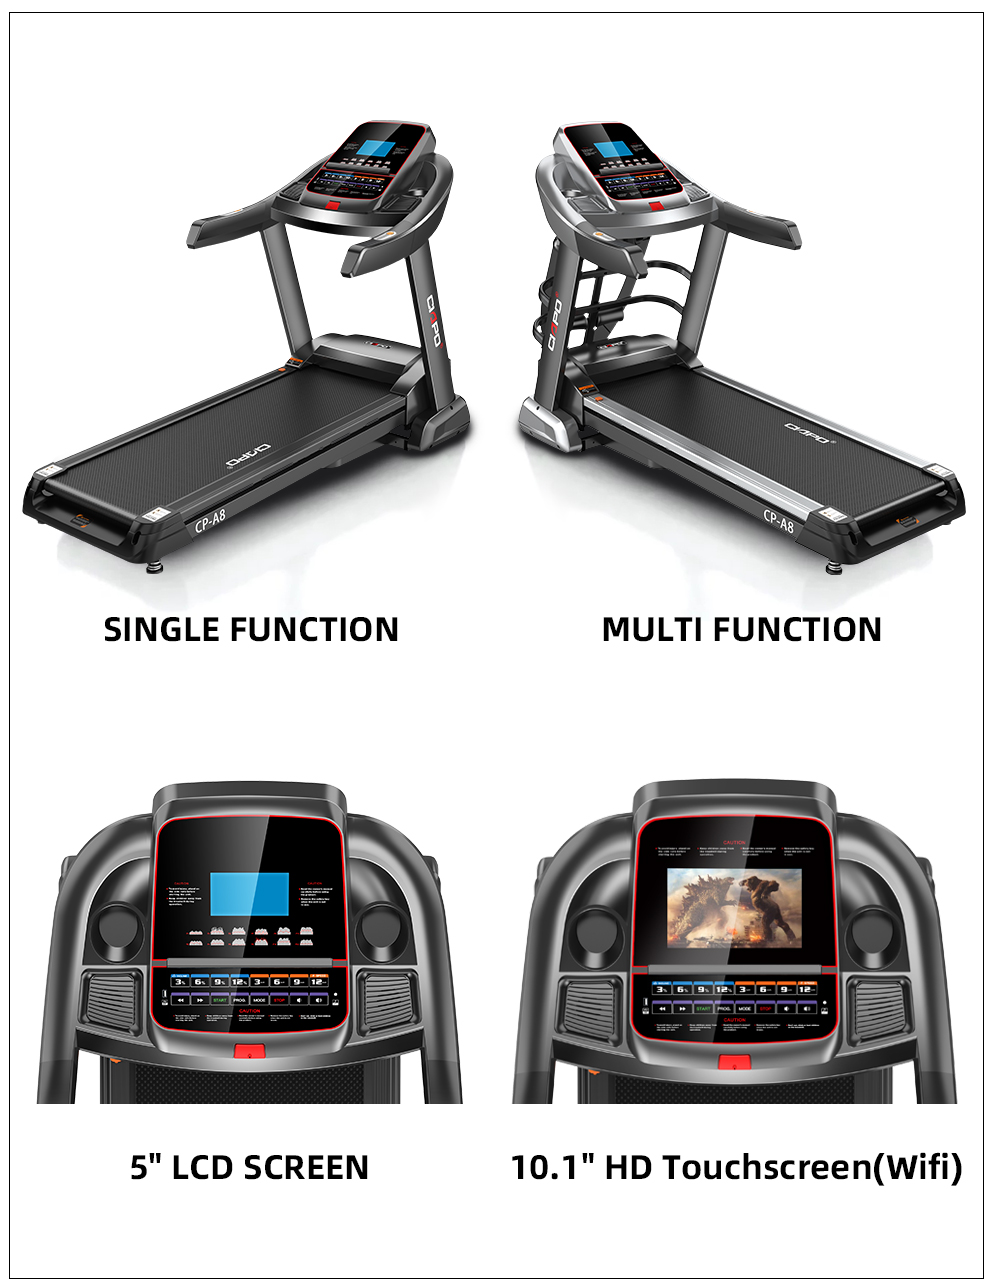 Hot Sale Multi-Function Indoor Gym Home Fitness Running Equipment Electric Treadmill With massage